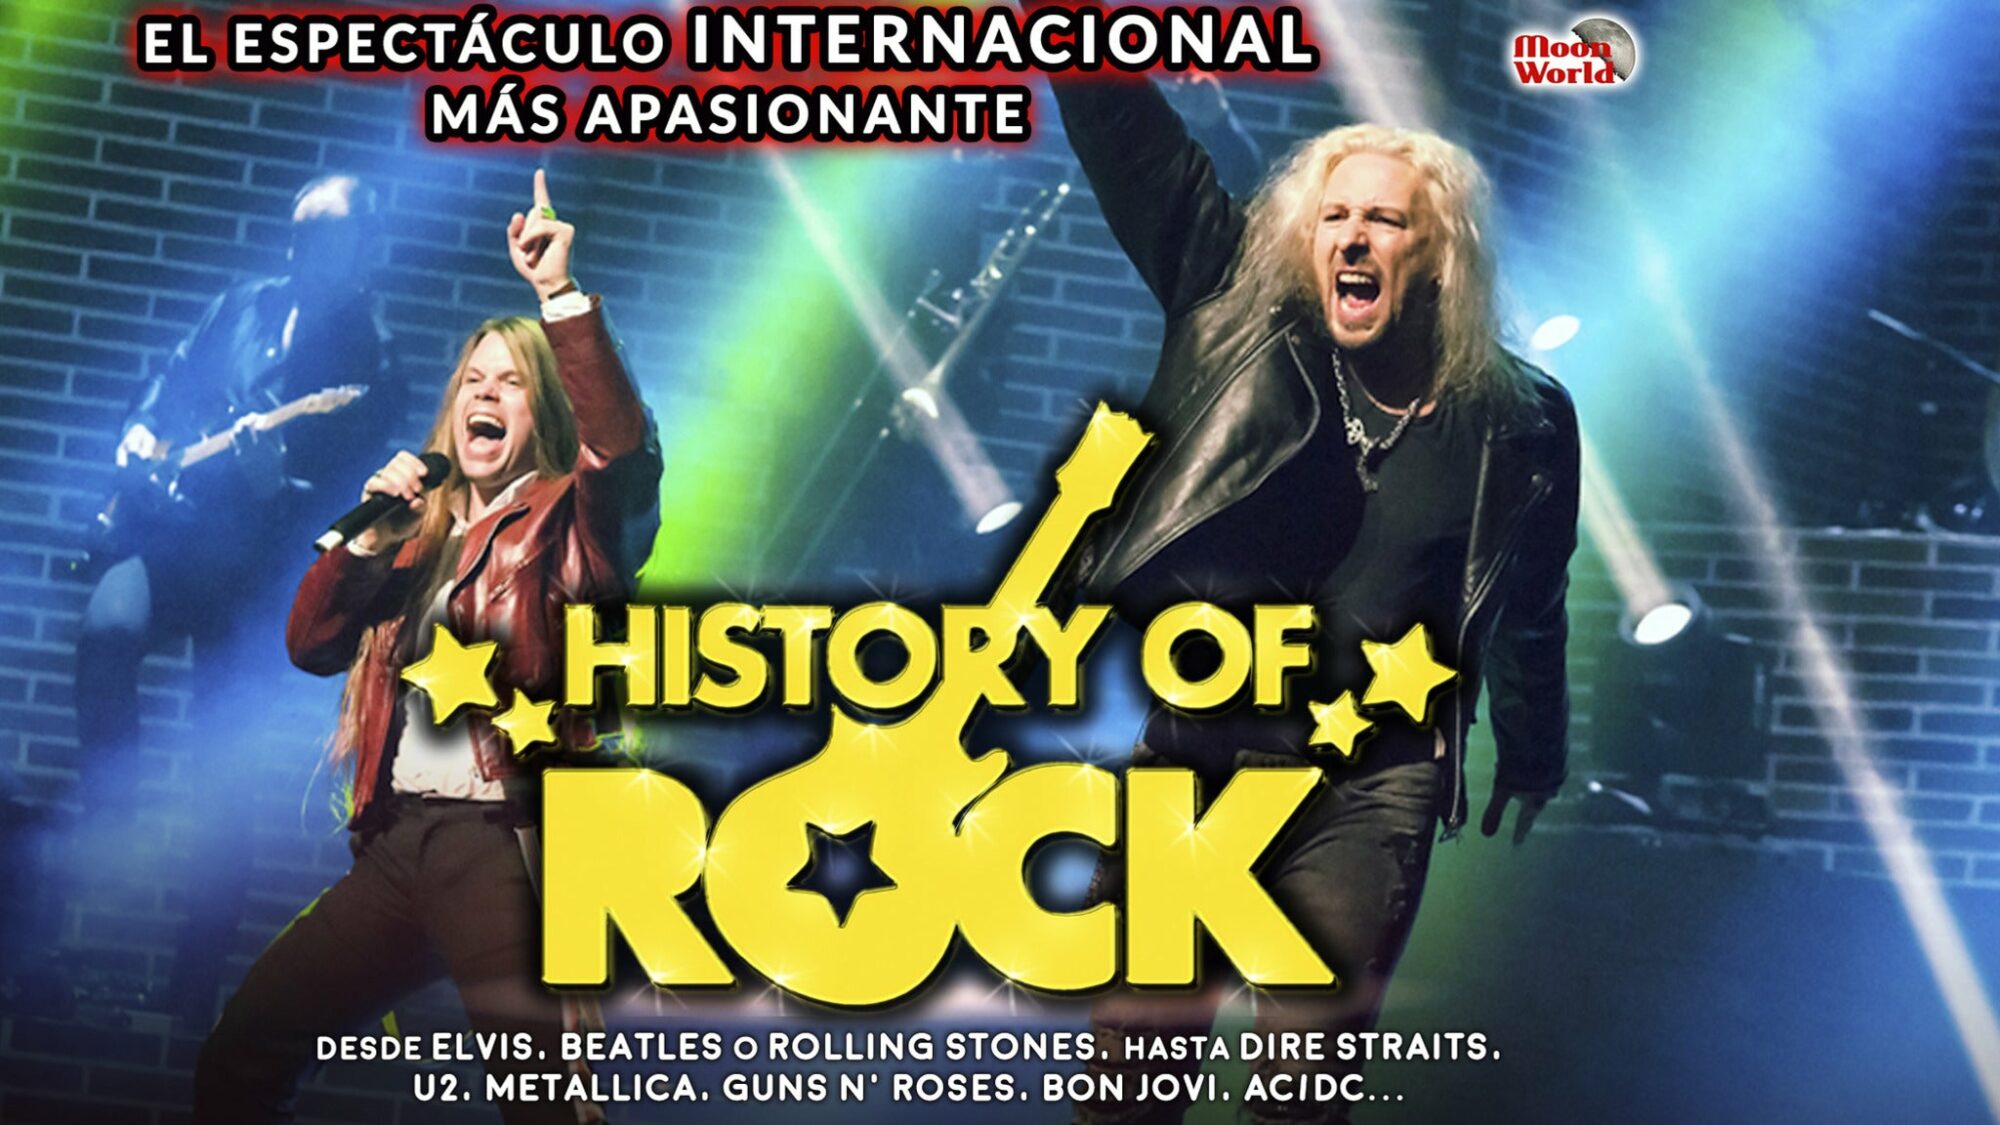 Image name The History of Rock at Whitby Pavilion Theatre Whitby the 1 image from the post The History of Rock at Whitby Pavilion Theatre, Whitby in Yorkshire.com.